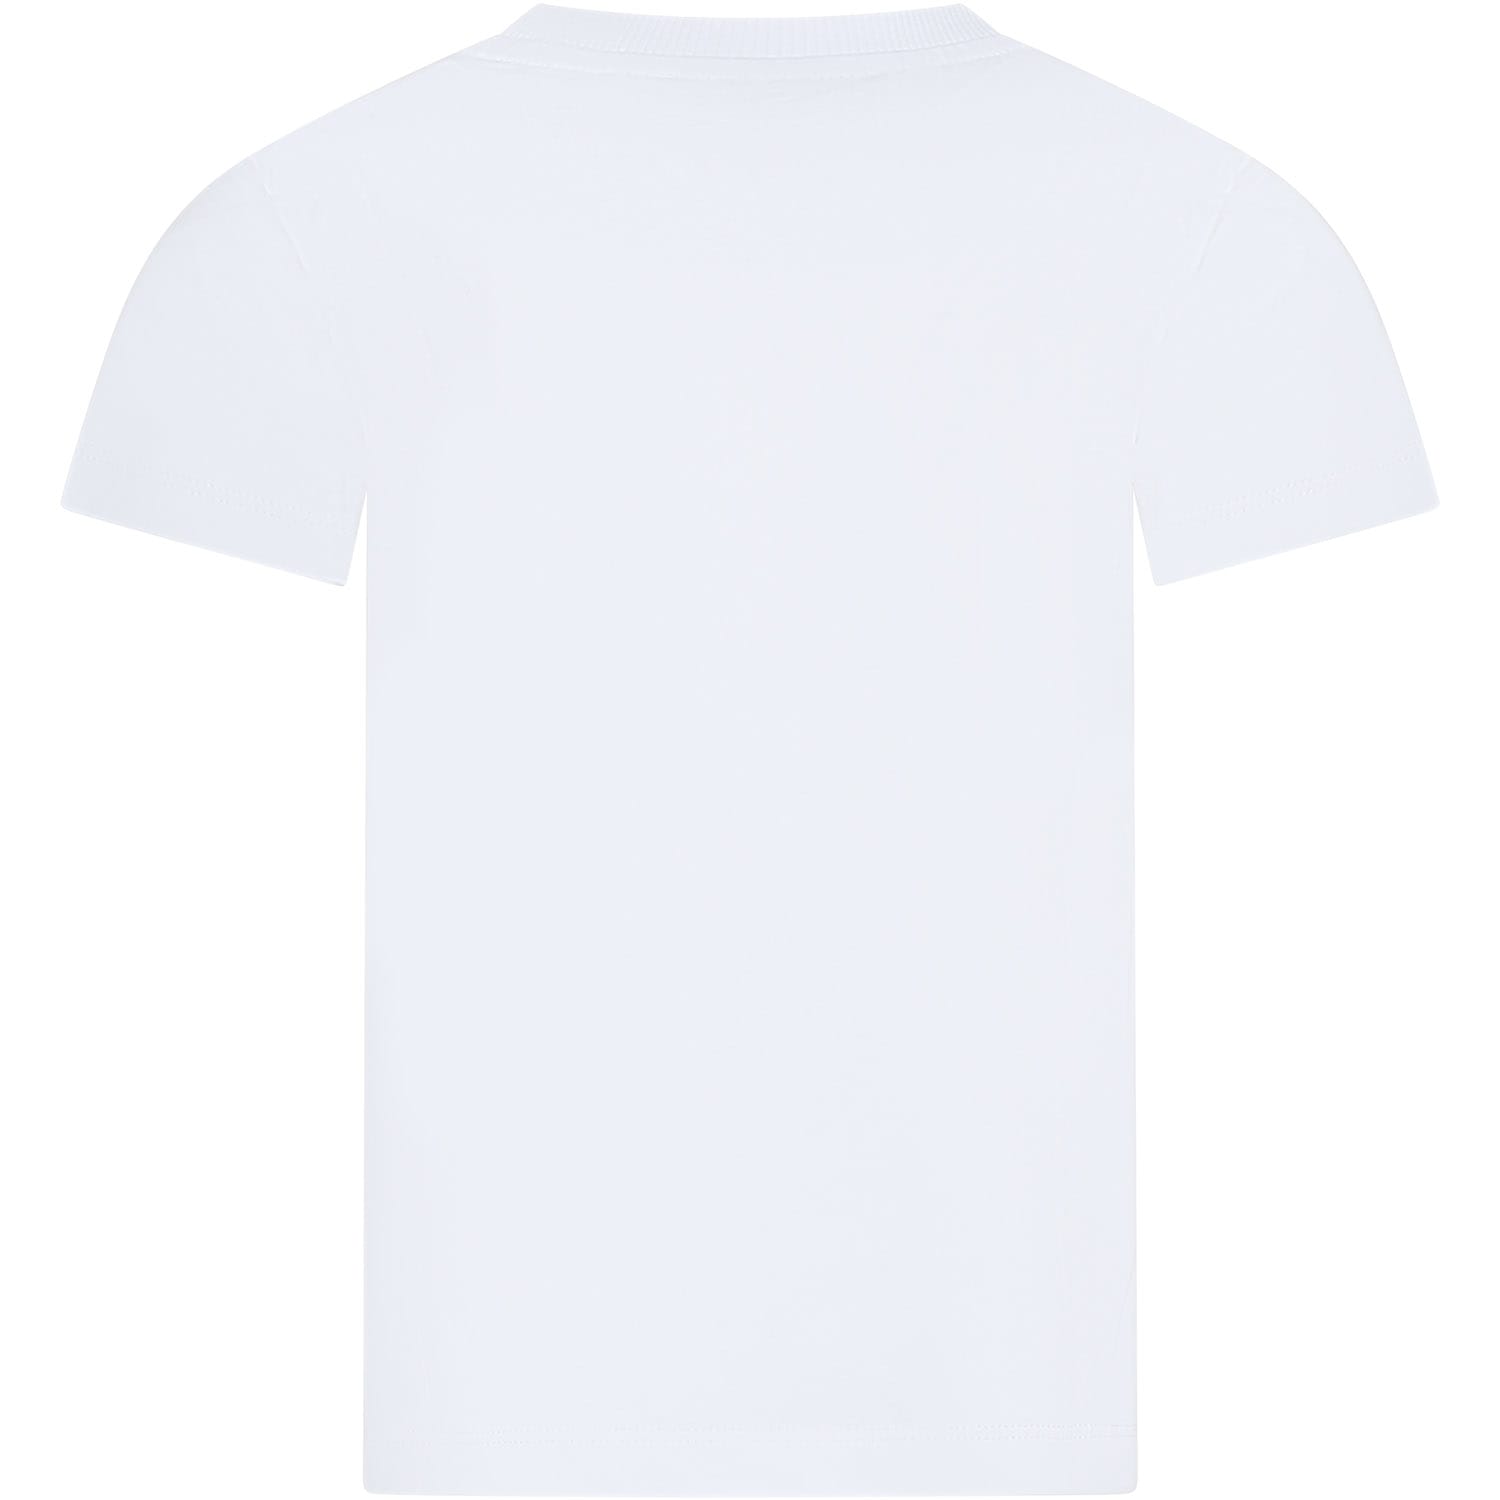 Shop Moschino White T-shirt For Kids With Teddy Bear And Logo